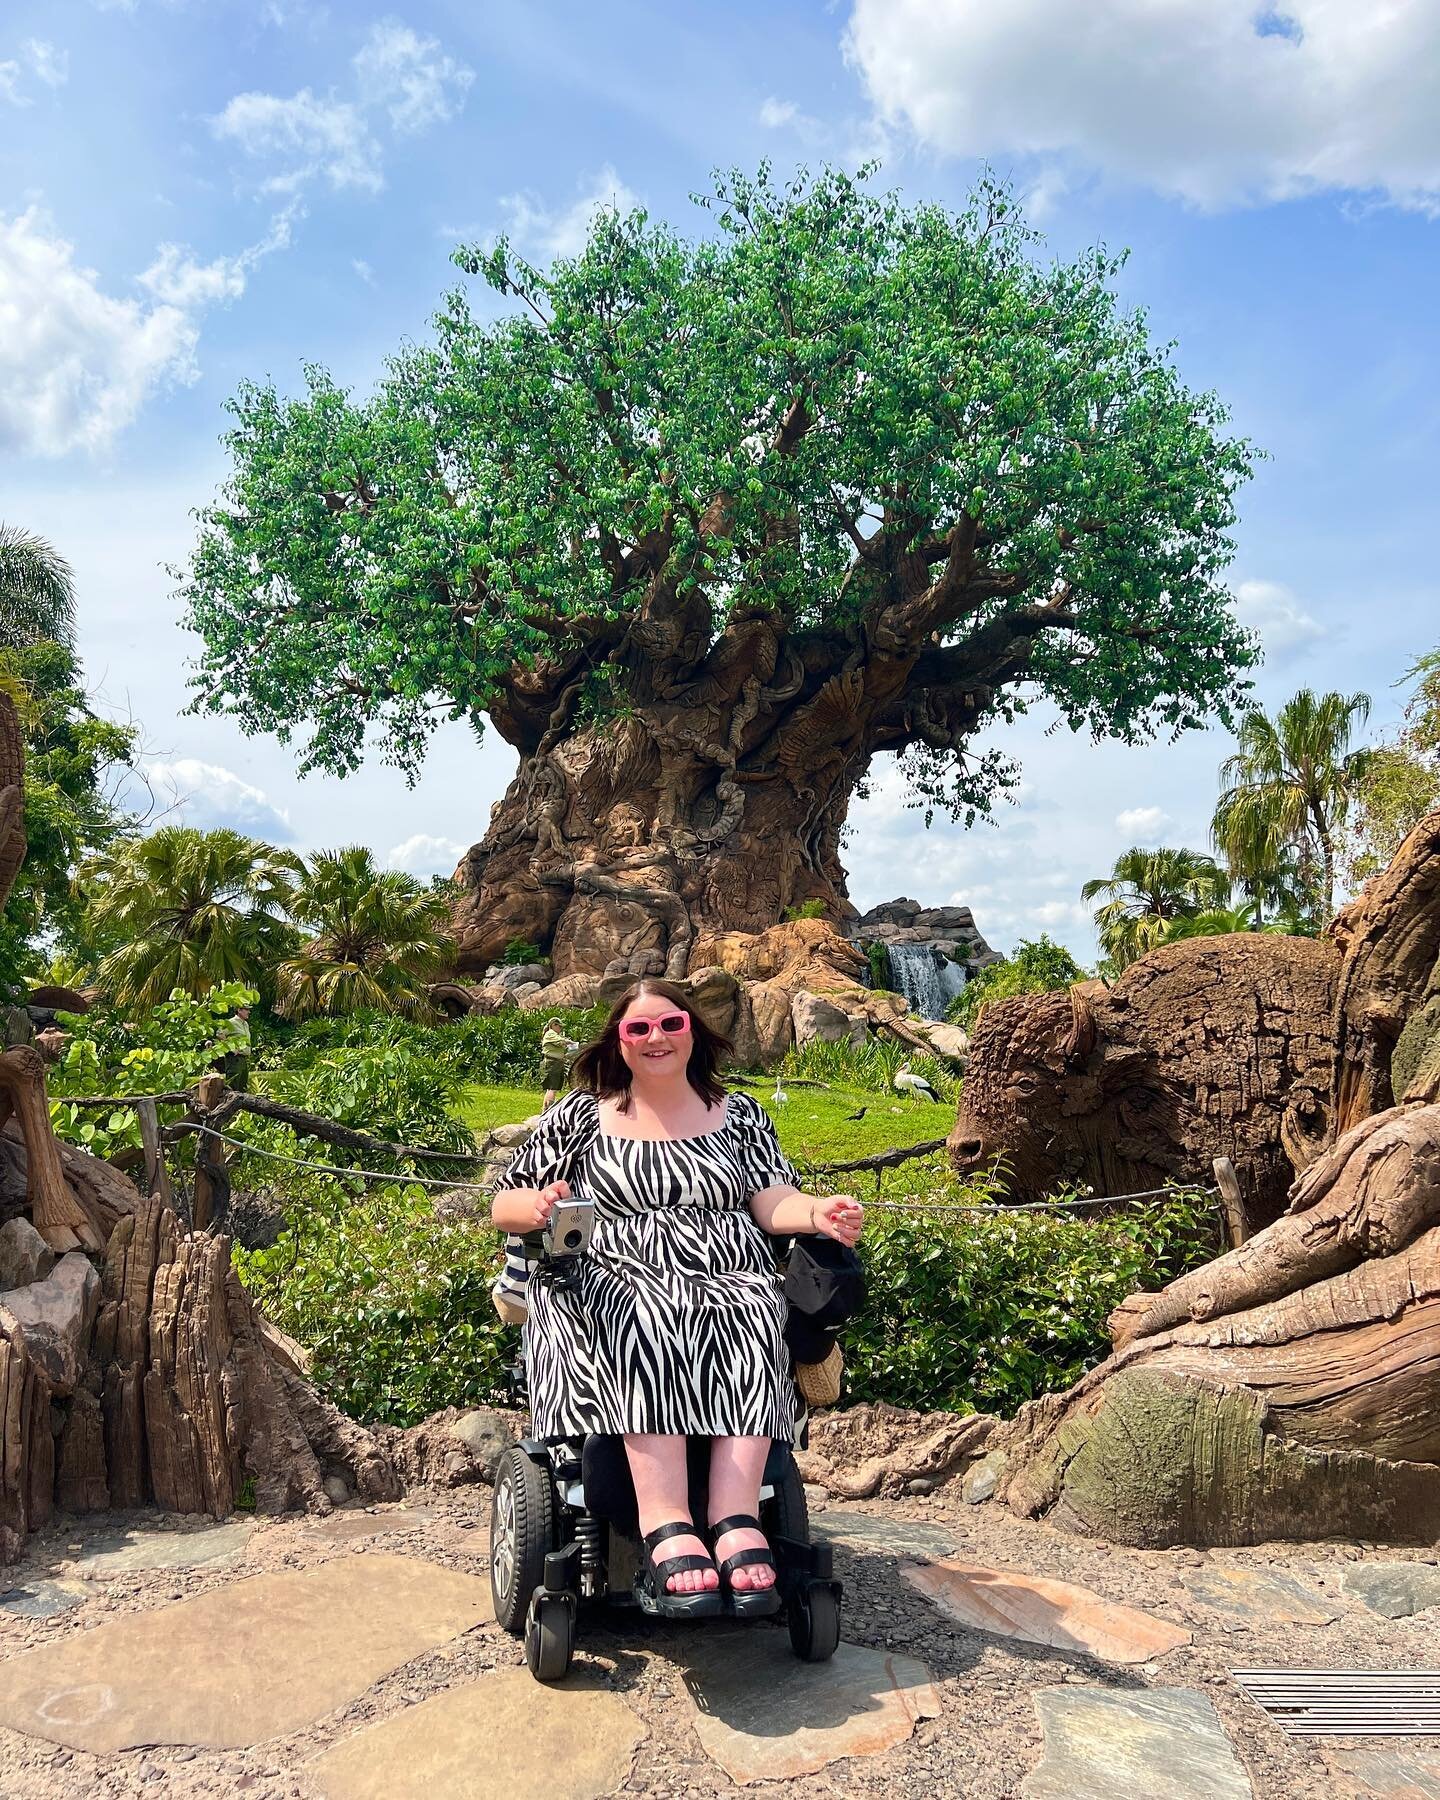 Animal Kingdom 🦒🐘🐠🦁

We&rsquo;ve been twice on this trip and I love it so much! The shows were incredible, we&rsquo;ve seen 
- Feathered Friends in Flight
- Finding Nemo: The big blue and beyond!
- Festival of the Lion King

There&rsquo;s not as 